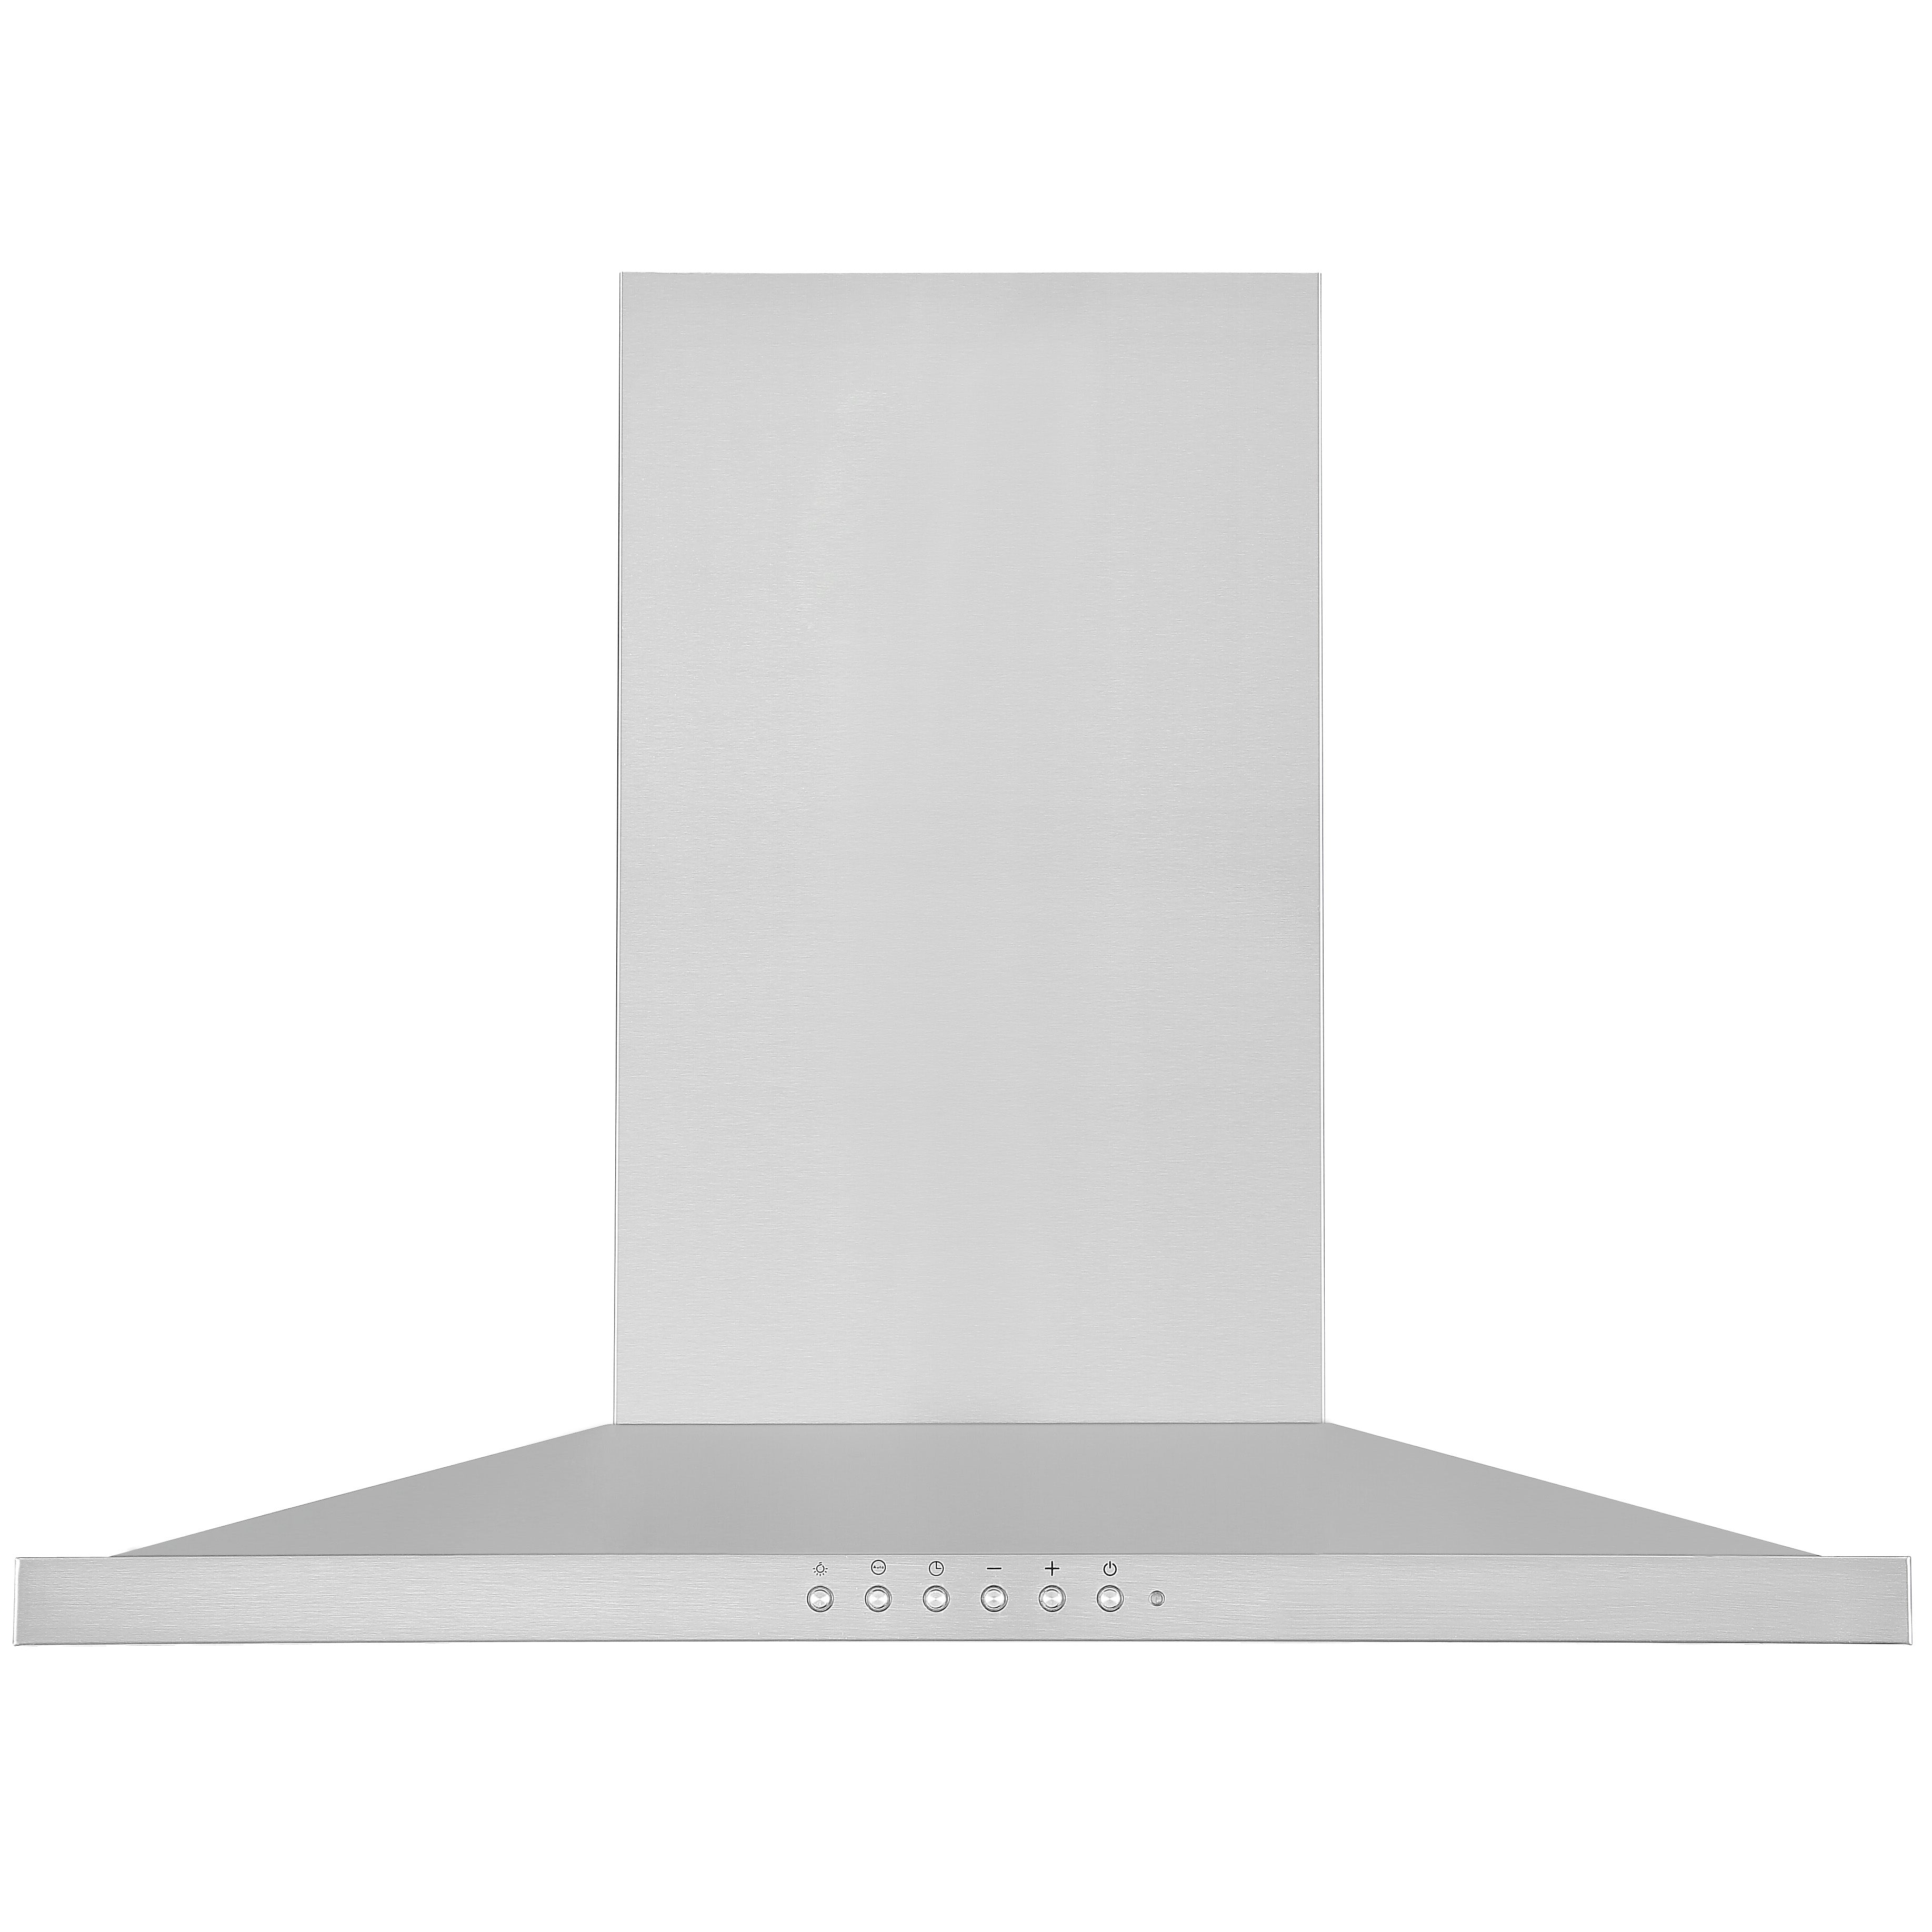 WPL630 30 in. Convertible Wall-Mounted Pyramid Range Hood in Stainless Steel with Night Light Feature